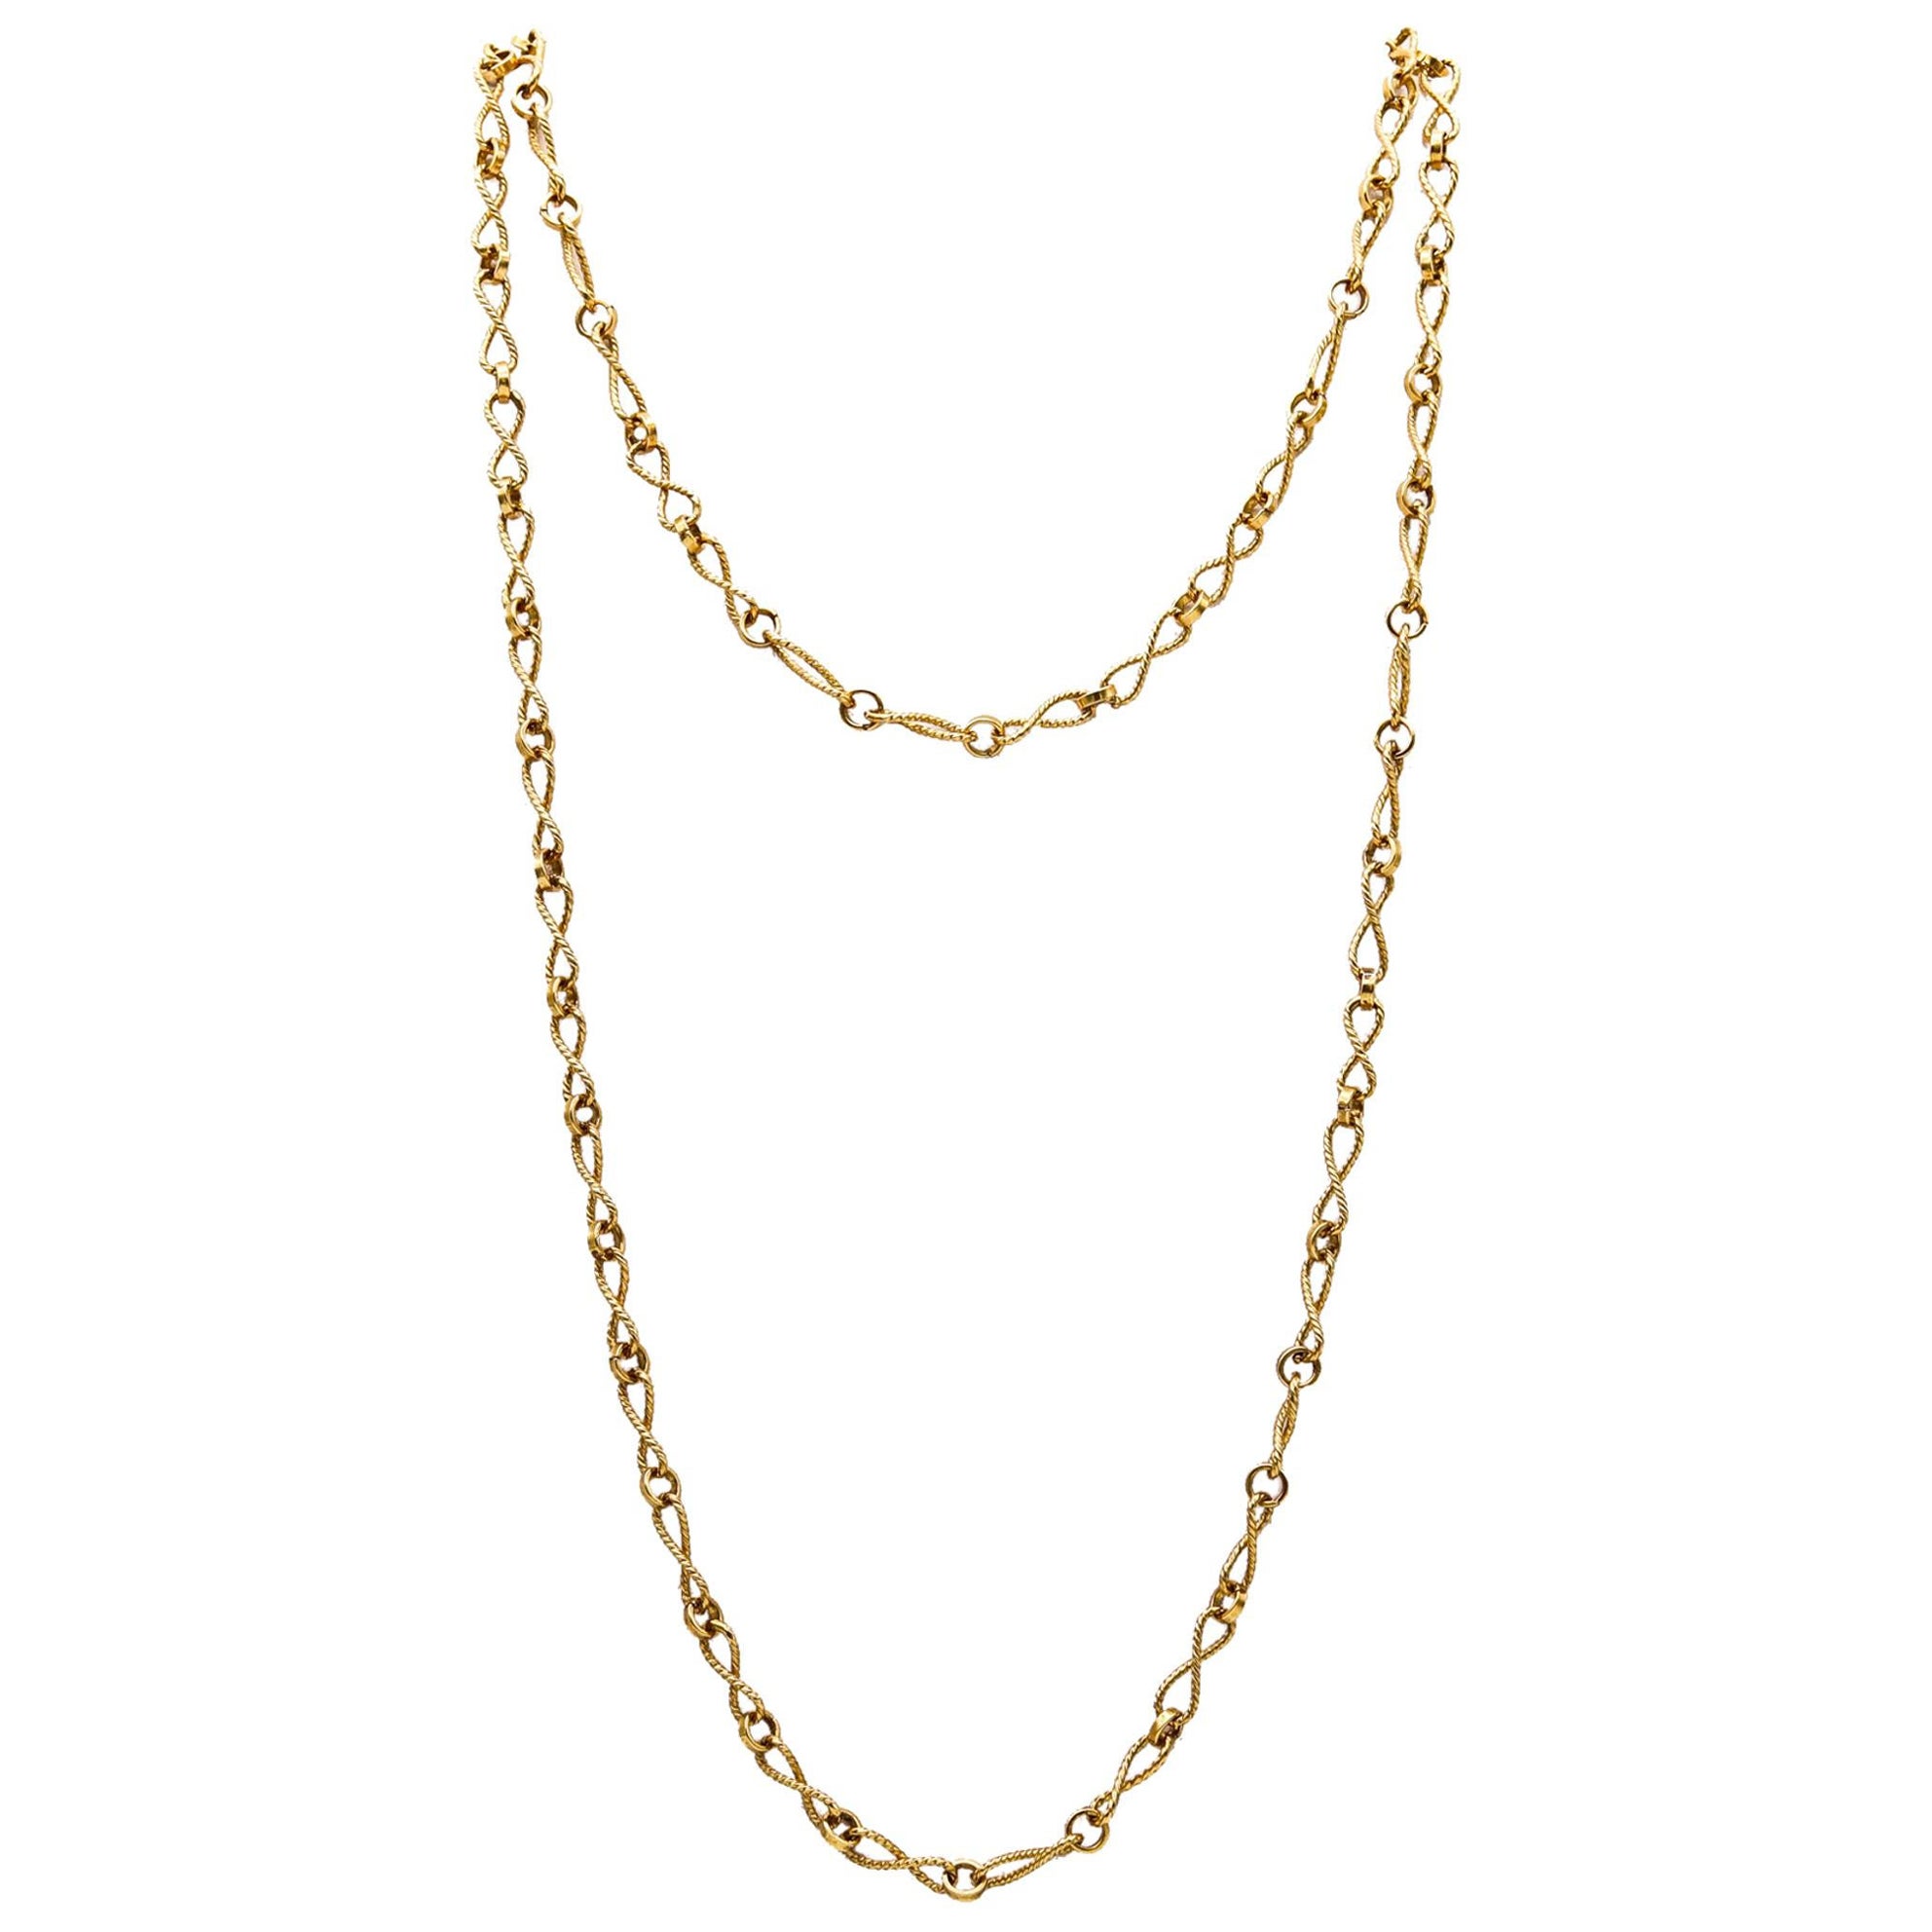 Alessi Domenico 1970 Retro Modern Twisted Long Chain In Solid 18Kt Yellow Gold For Sale